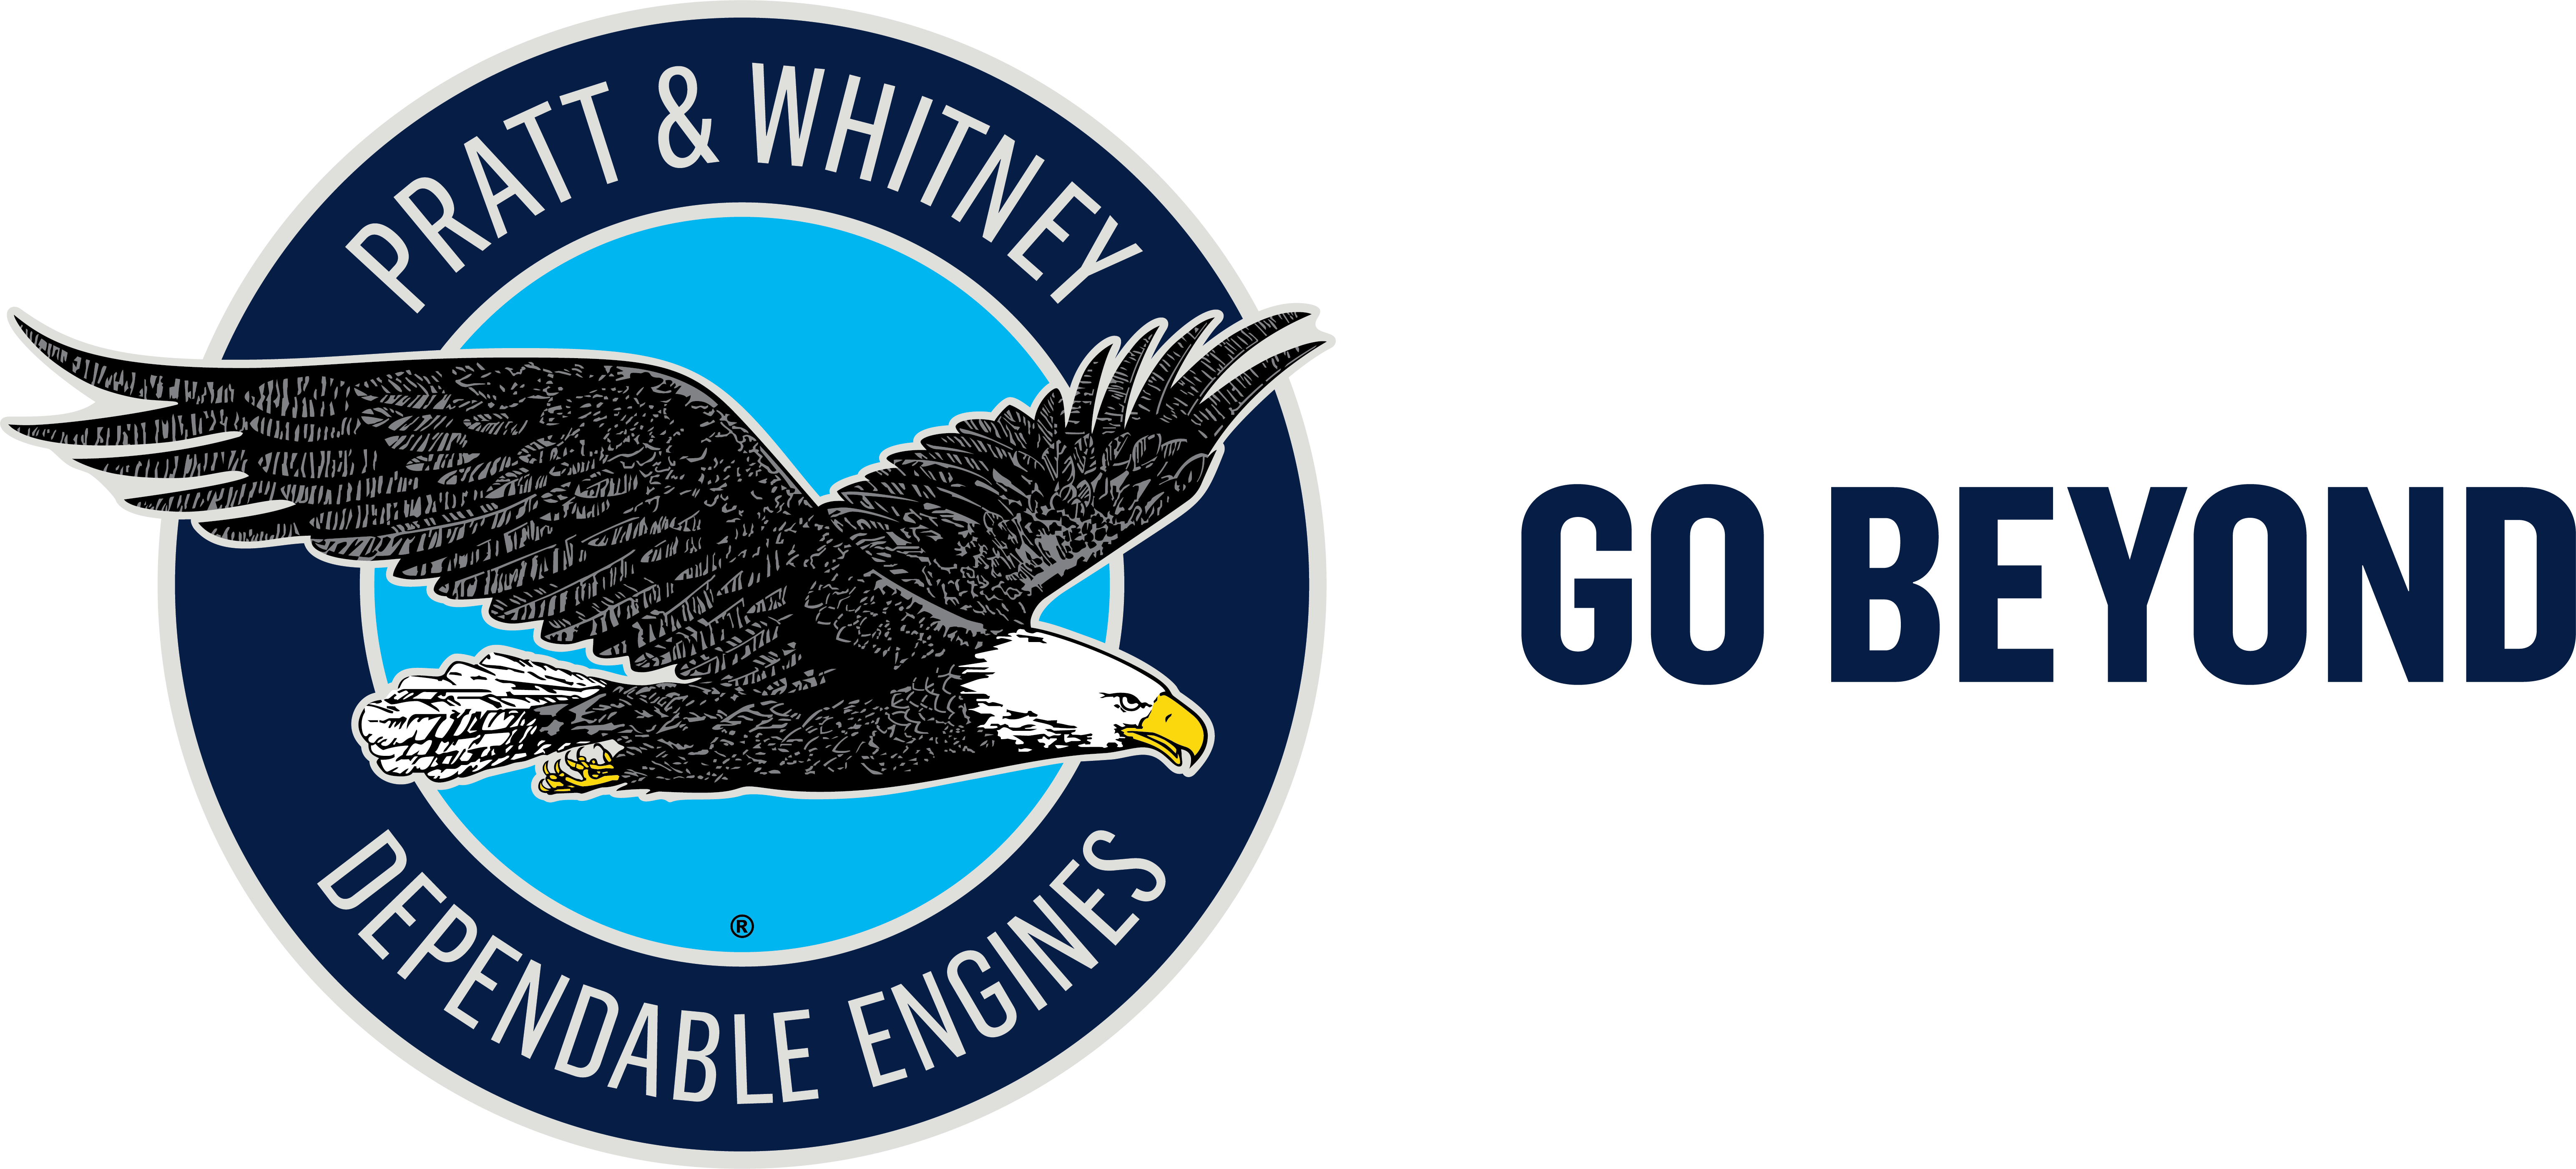 POSTPONED - Selling & Relationship Building Workshop Hosted by Pratt & Whitney Canada - May 27